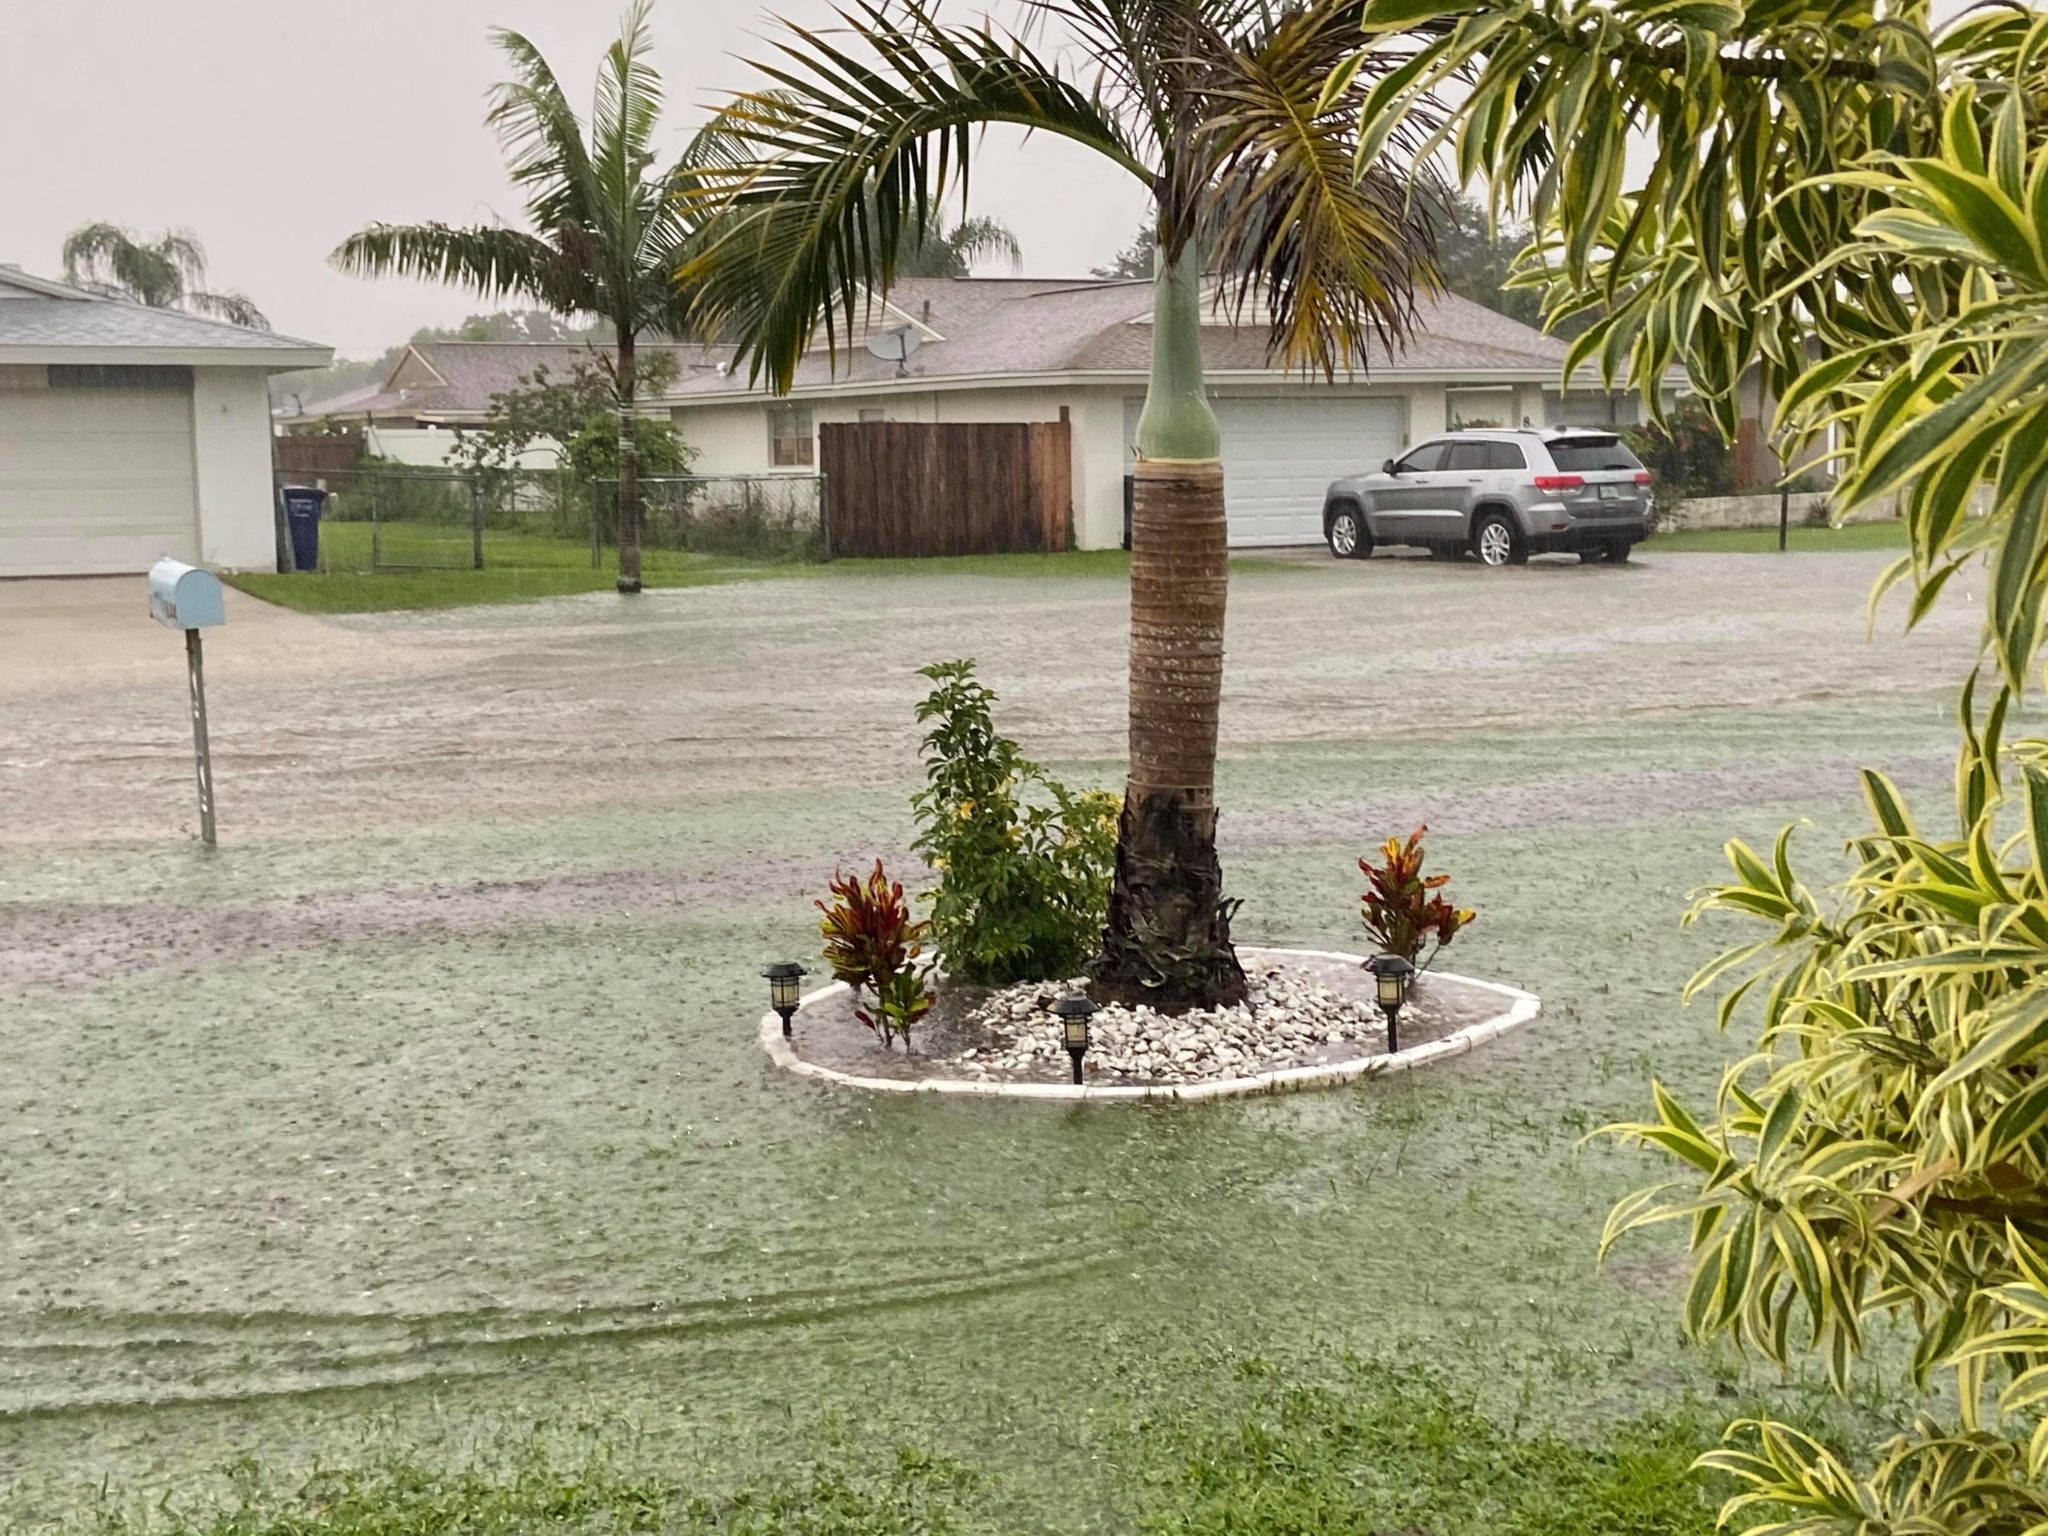 Residents in south Fort Myers say they've never seen flooding like this